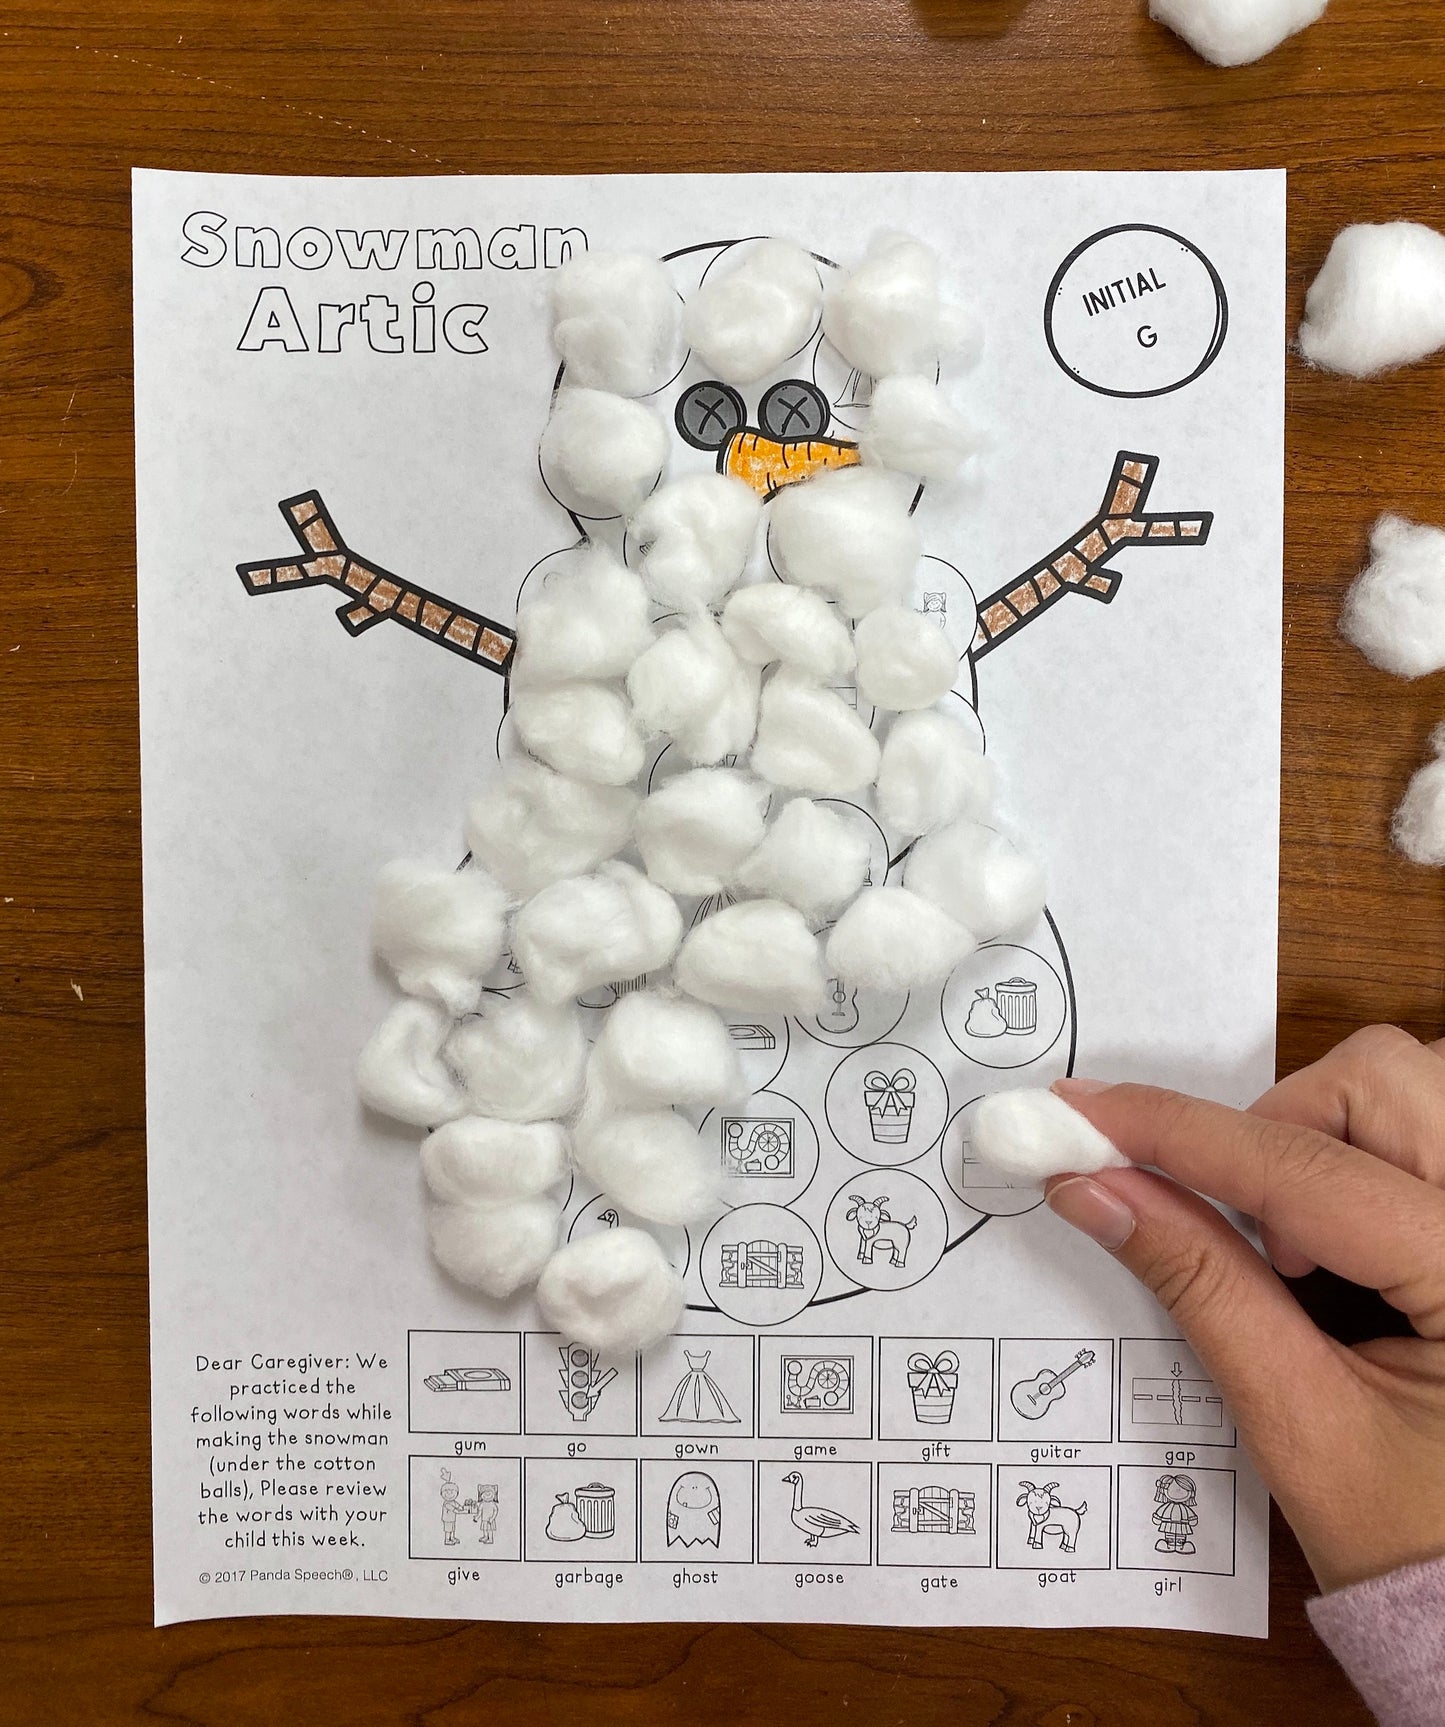 Snowman Articulation and Language! Speech Therapy Cotton Ball craft